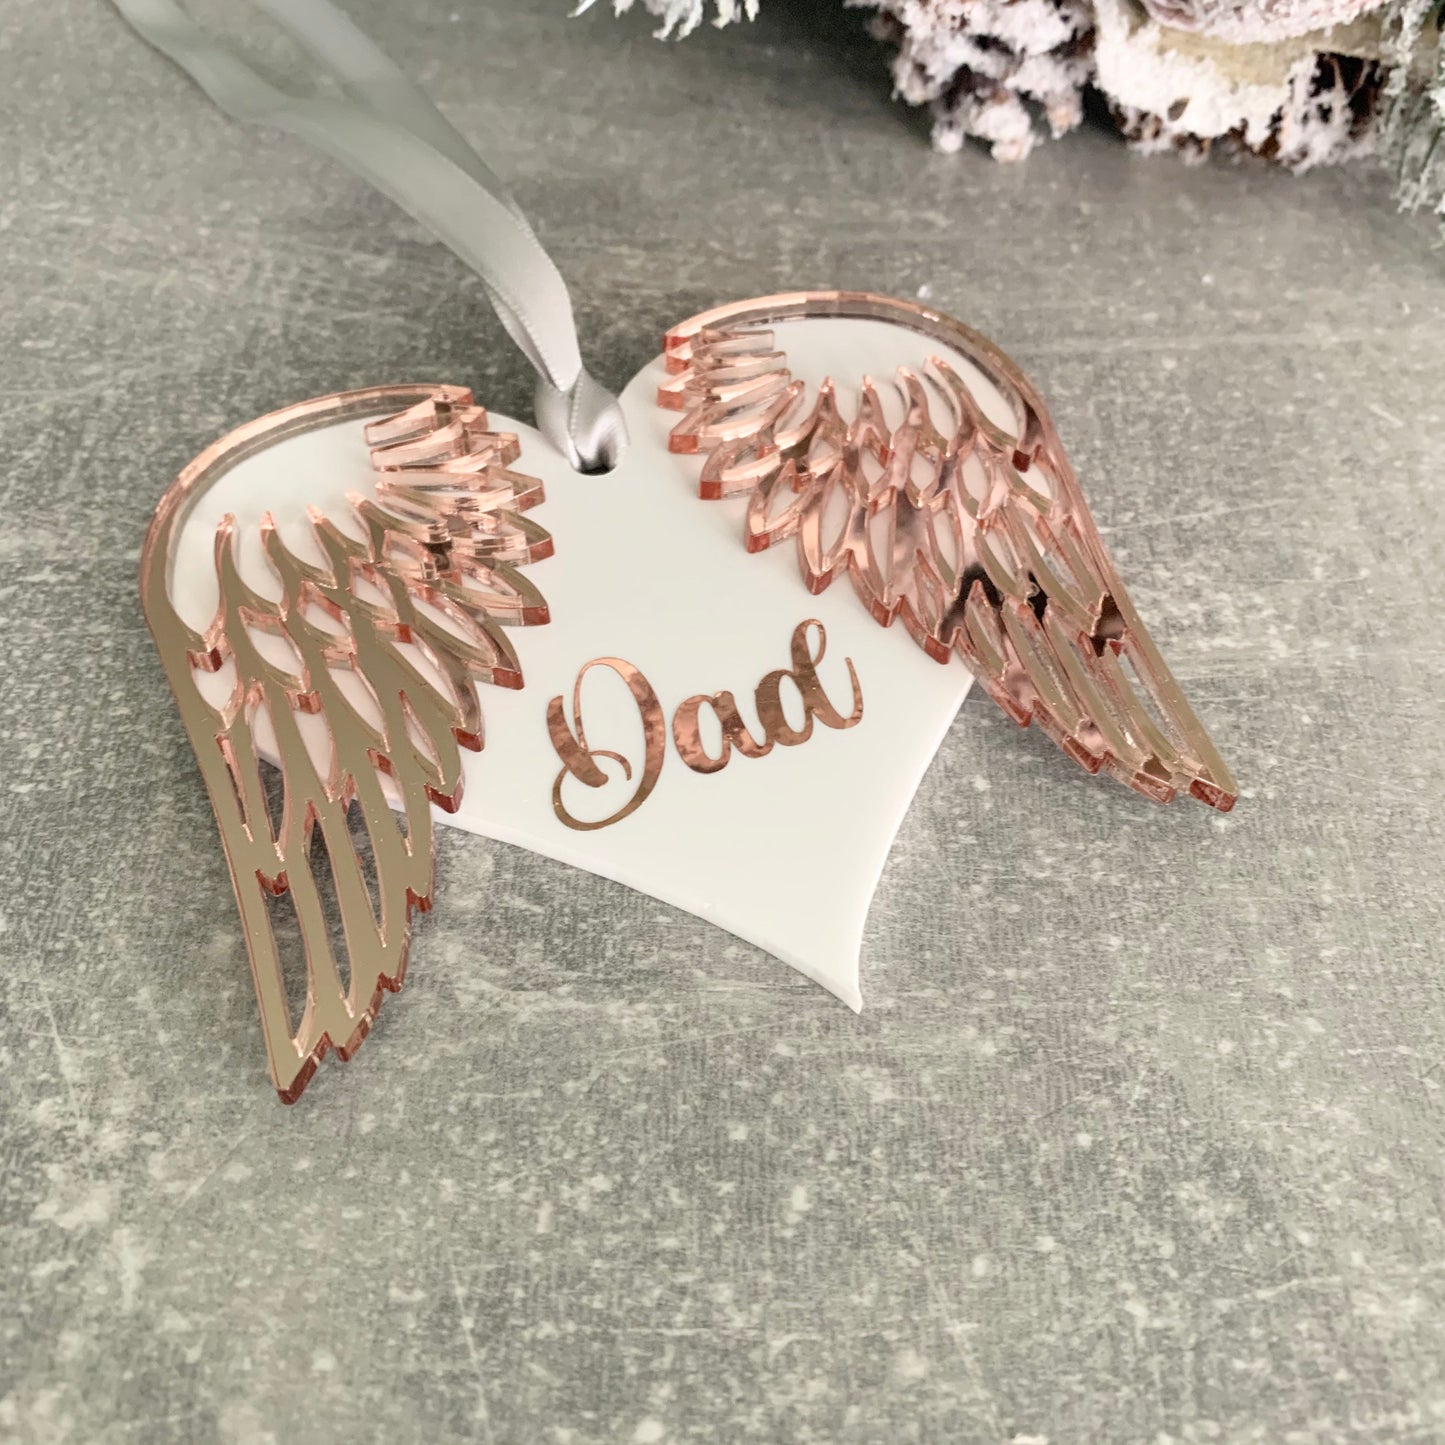 Personalised Rose gold angel wings for a gravestone. Baby or family member loss memorial present to give to mourning friend